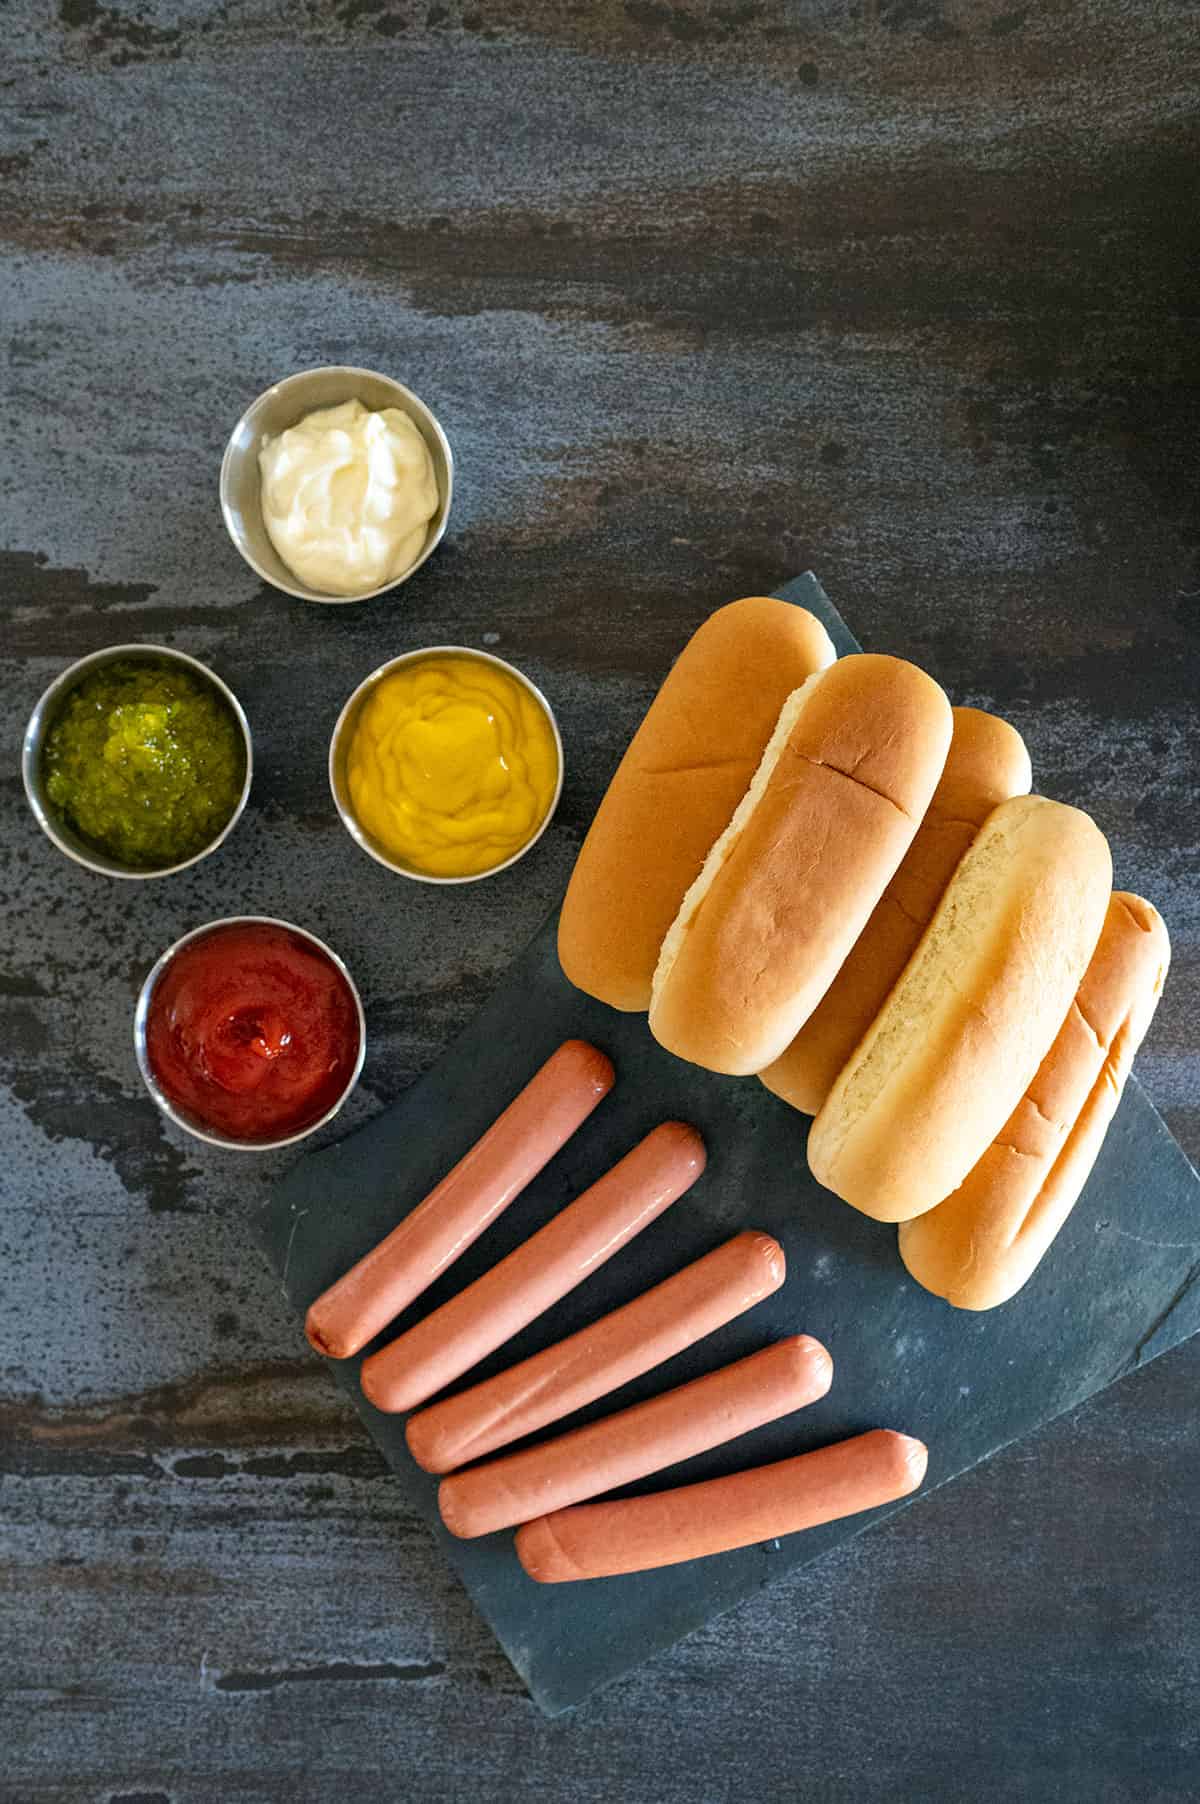 hot dogs, buns and condiments.